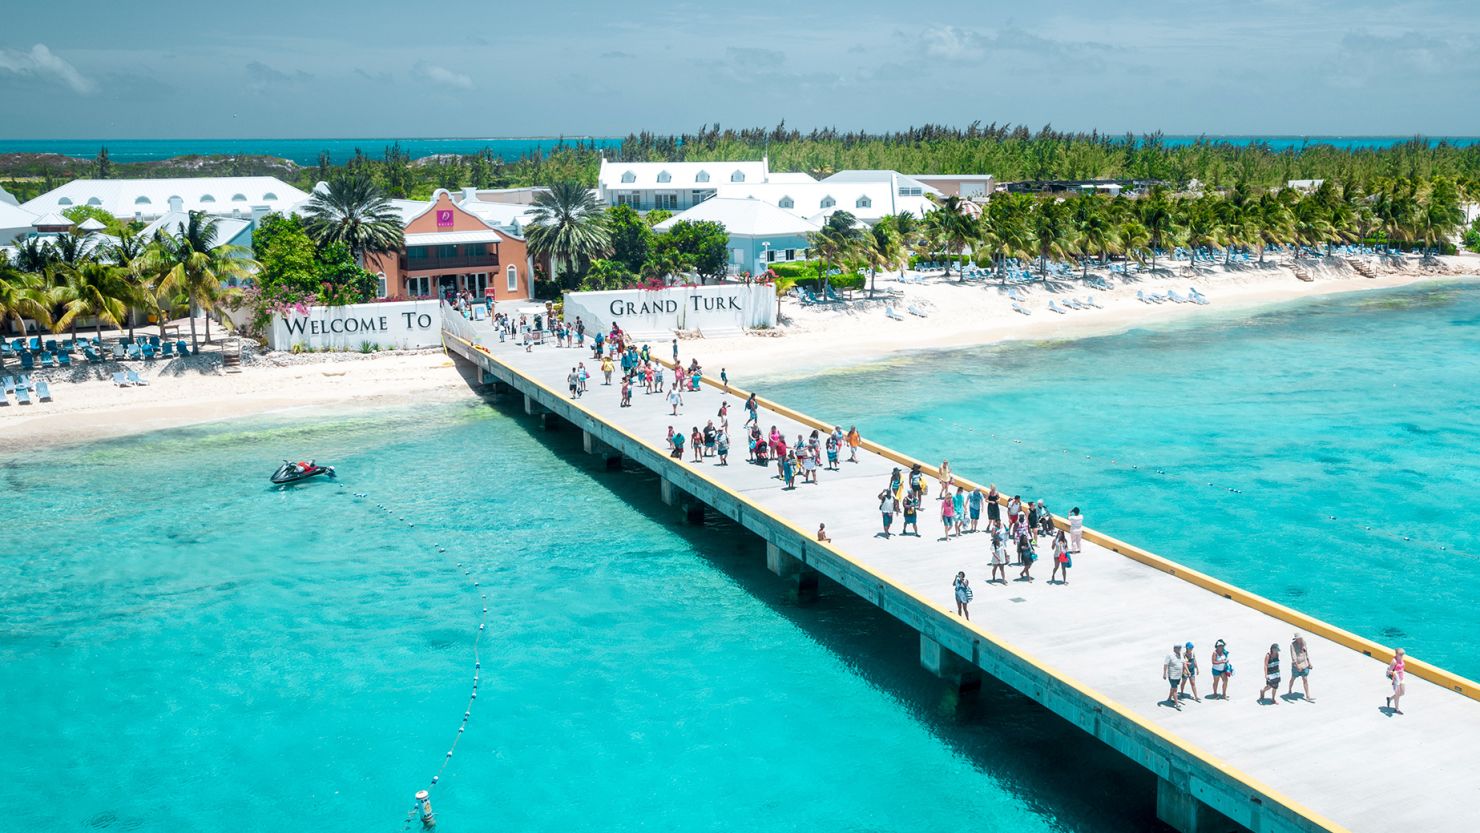 A tourist scene from Grand Turk island in the Turks and Caicos chain southeast of The Bahamas.